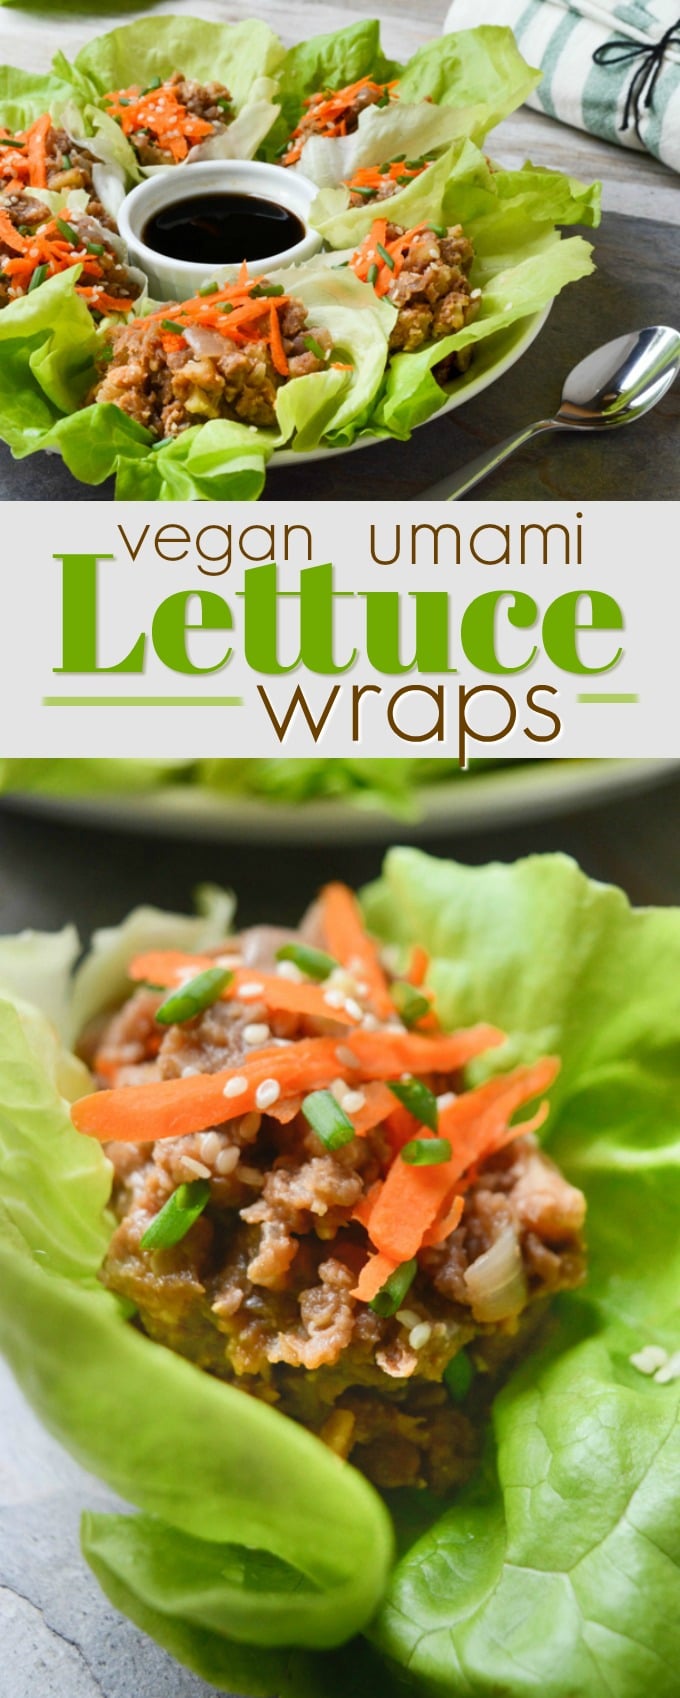 Asian-inspired vegan lettuce wraps are packed with a lentil-walnut "umami" filling. Serve these gluten-free wraps with a side of rice for a quick & simple lunch. Or enjoy them alone as a light snack.